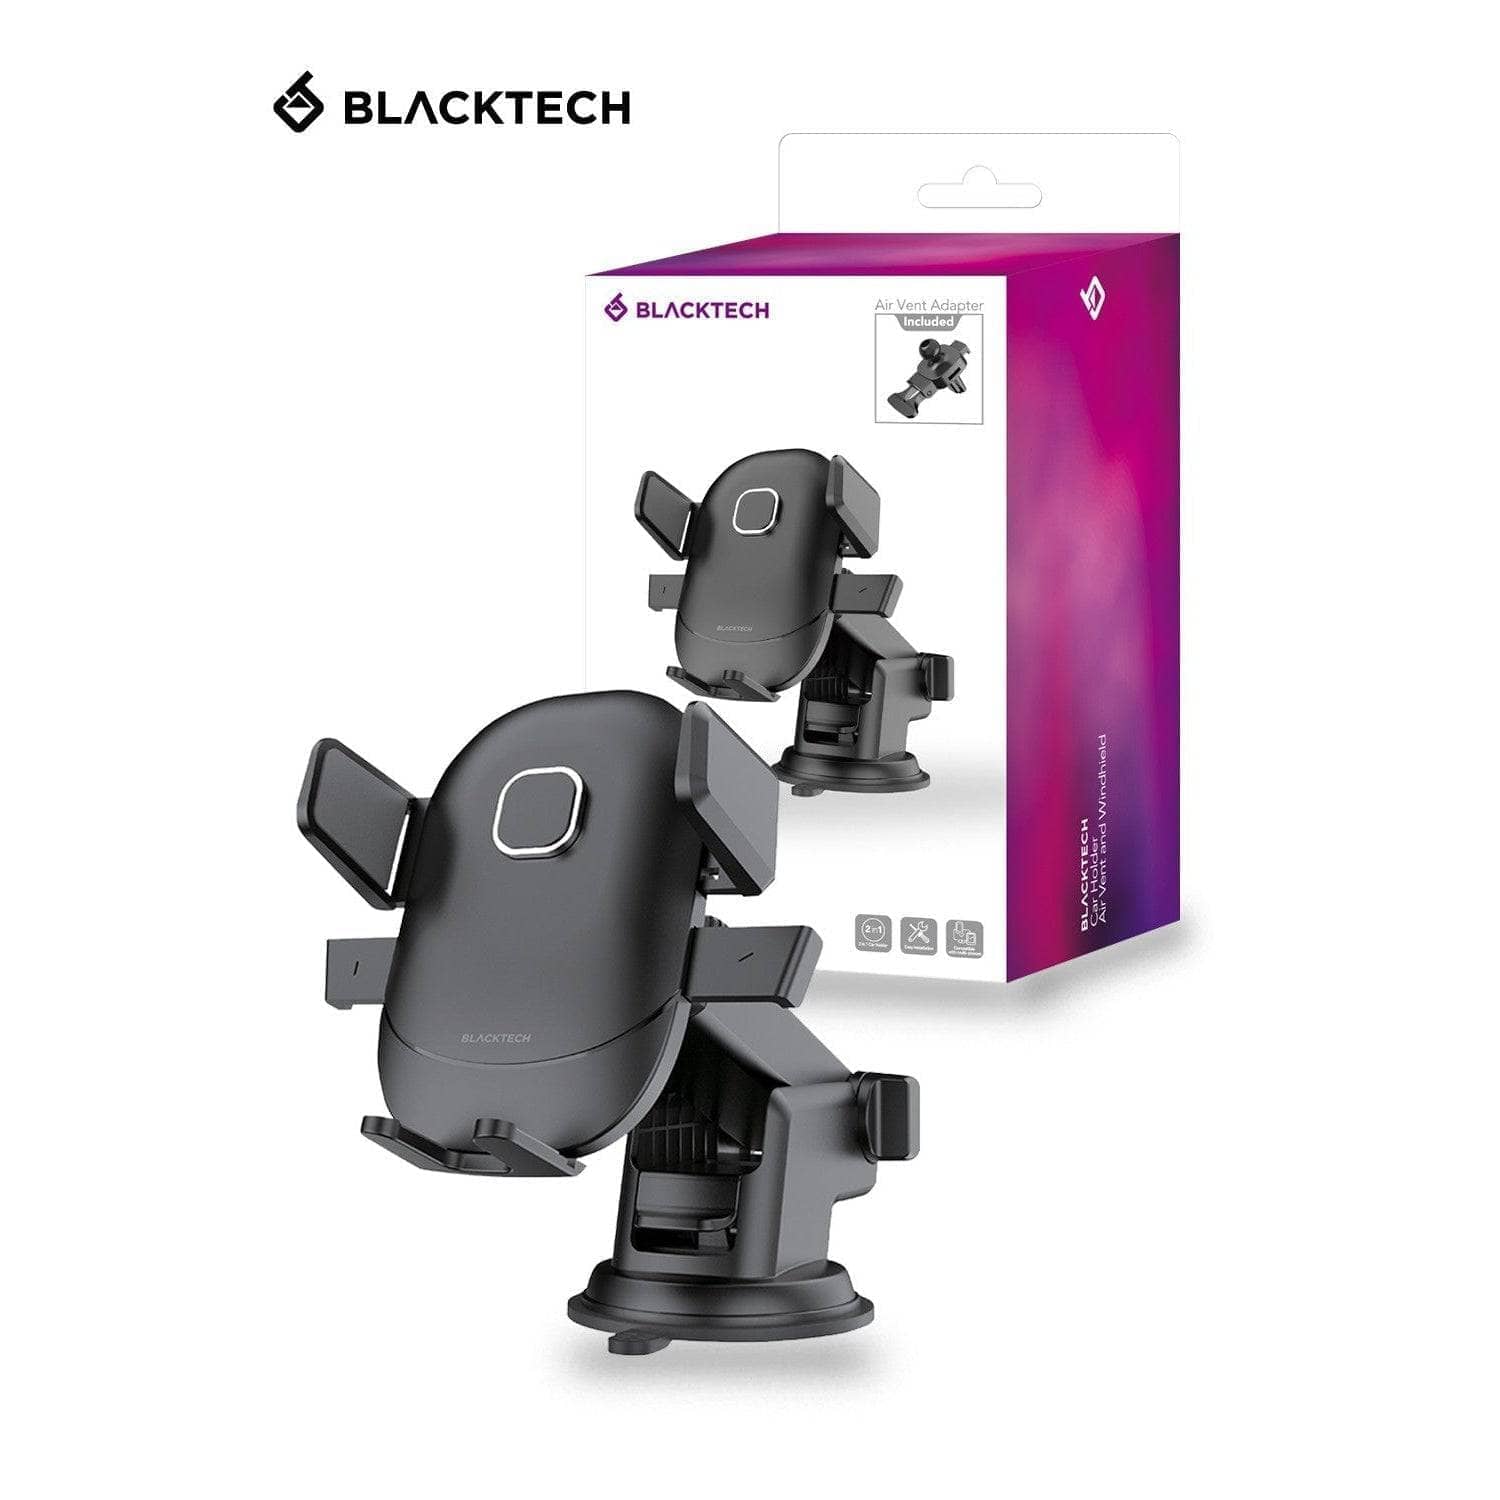 BLACKTECH 2 in 1 Air Vent and Windshield Car Holder - Black-Holder-BLACKTECH-www.PhoneGuy.com.au